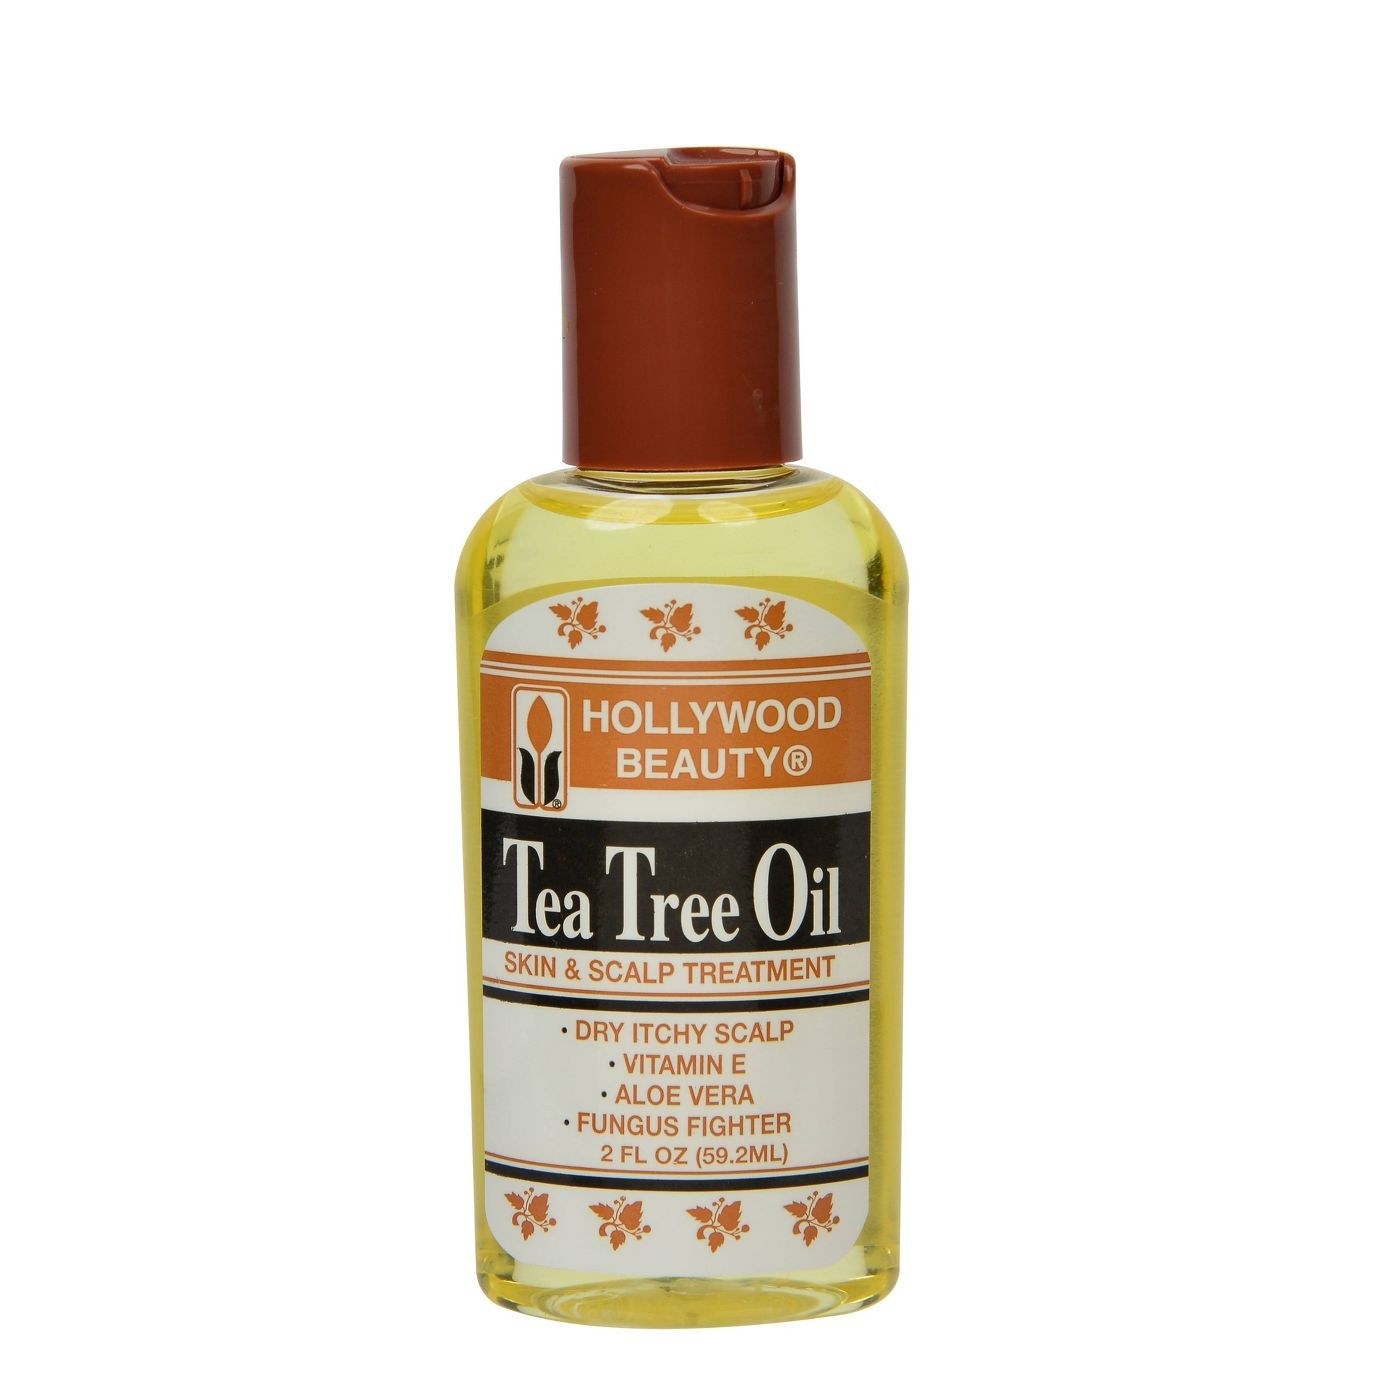 An image of a bottle of tea tree oil skin and hair treatment